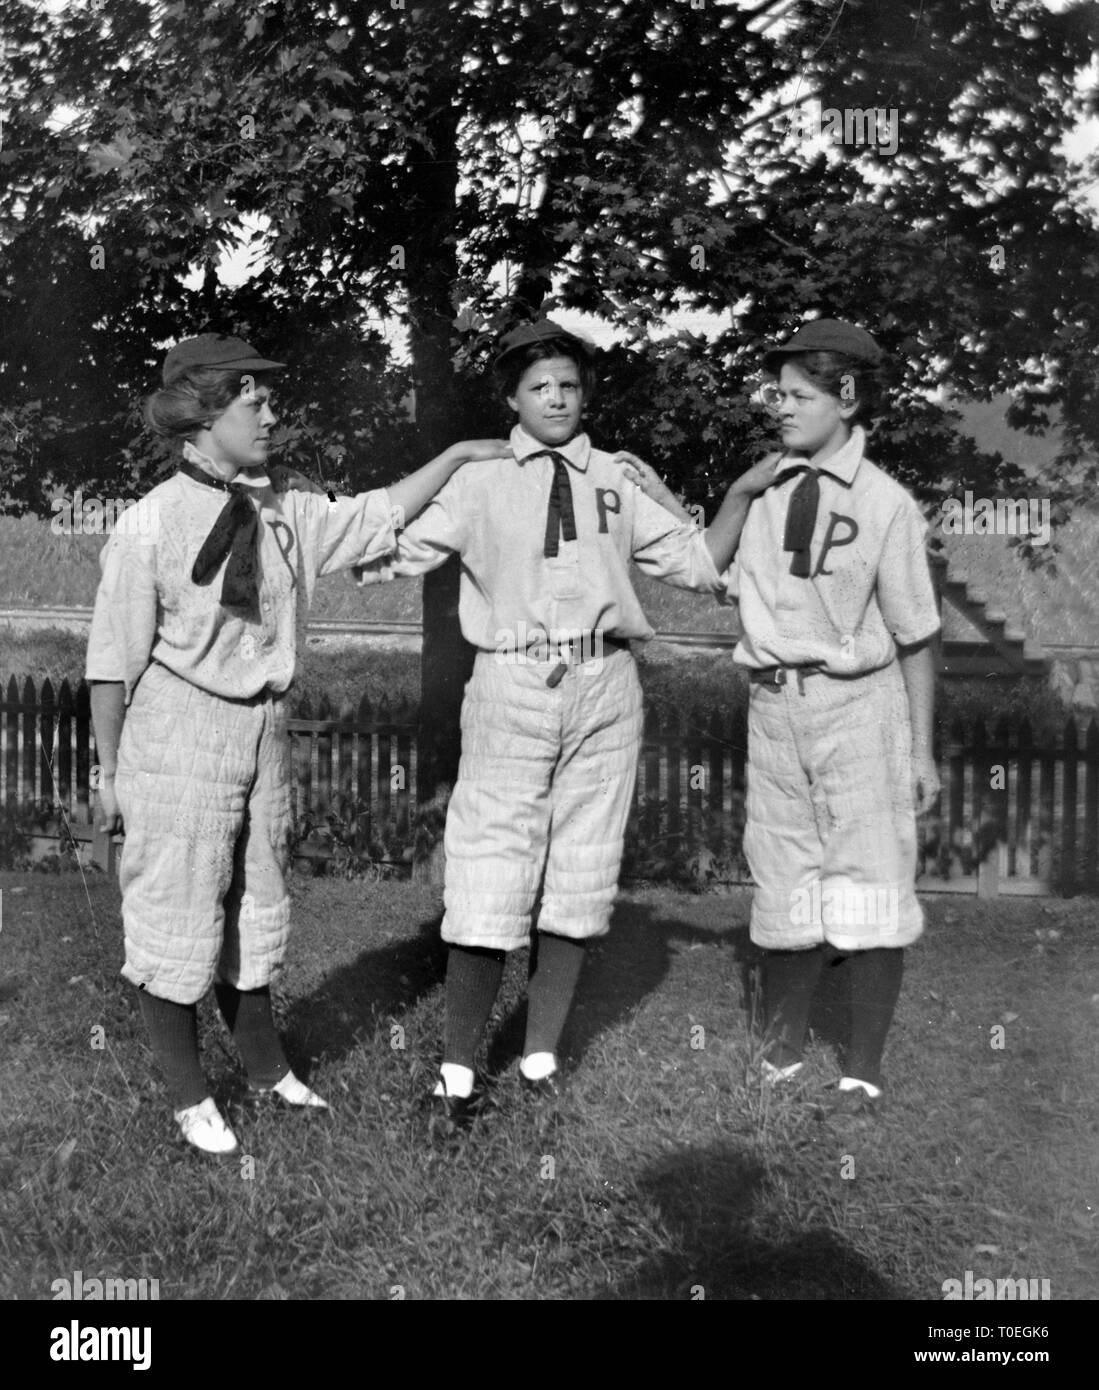 Three young women in baseball uniforms pose together in the backyard before the big game, ca. 1896. Stock Photo